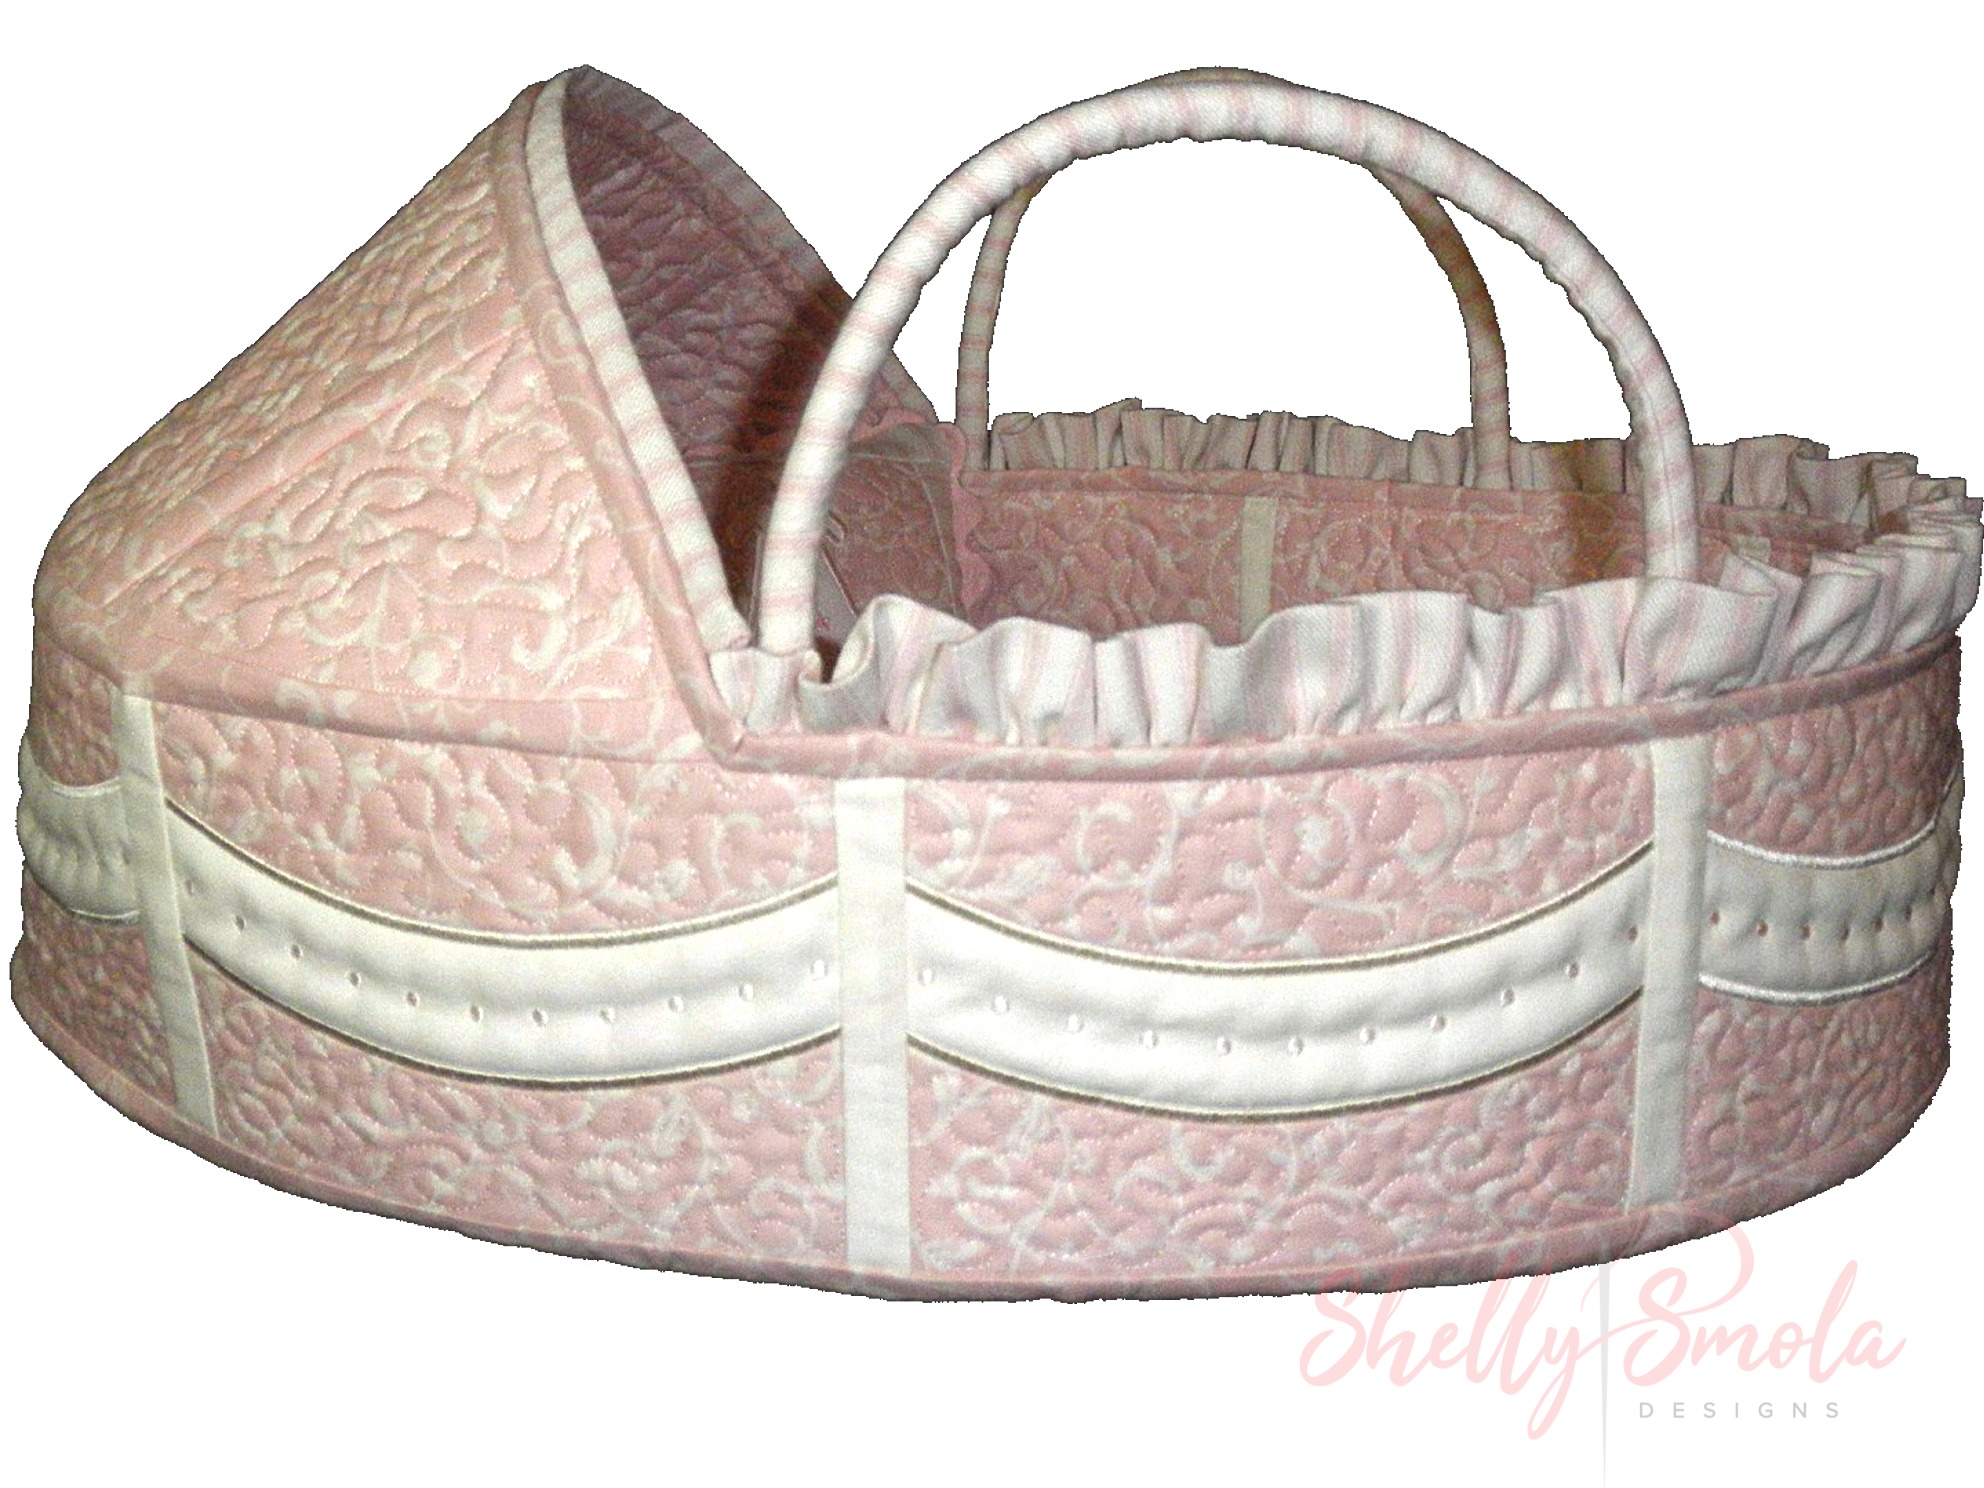 Baby Baskets by Shelly Smola